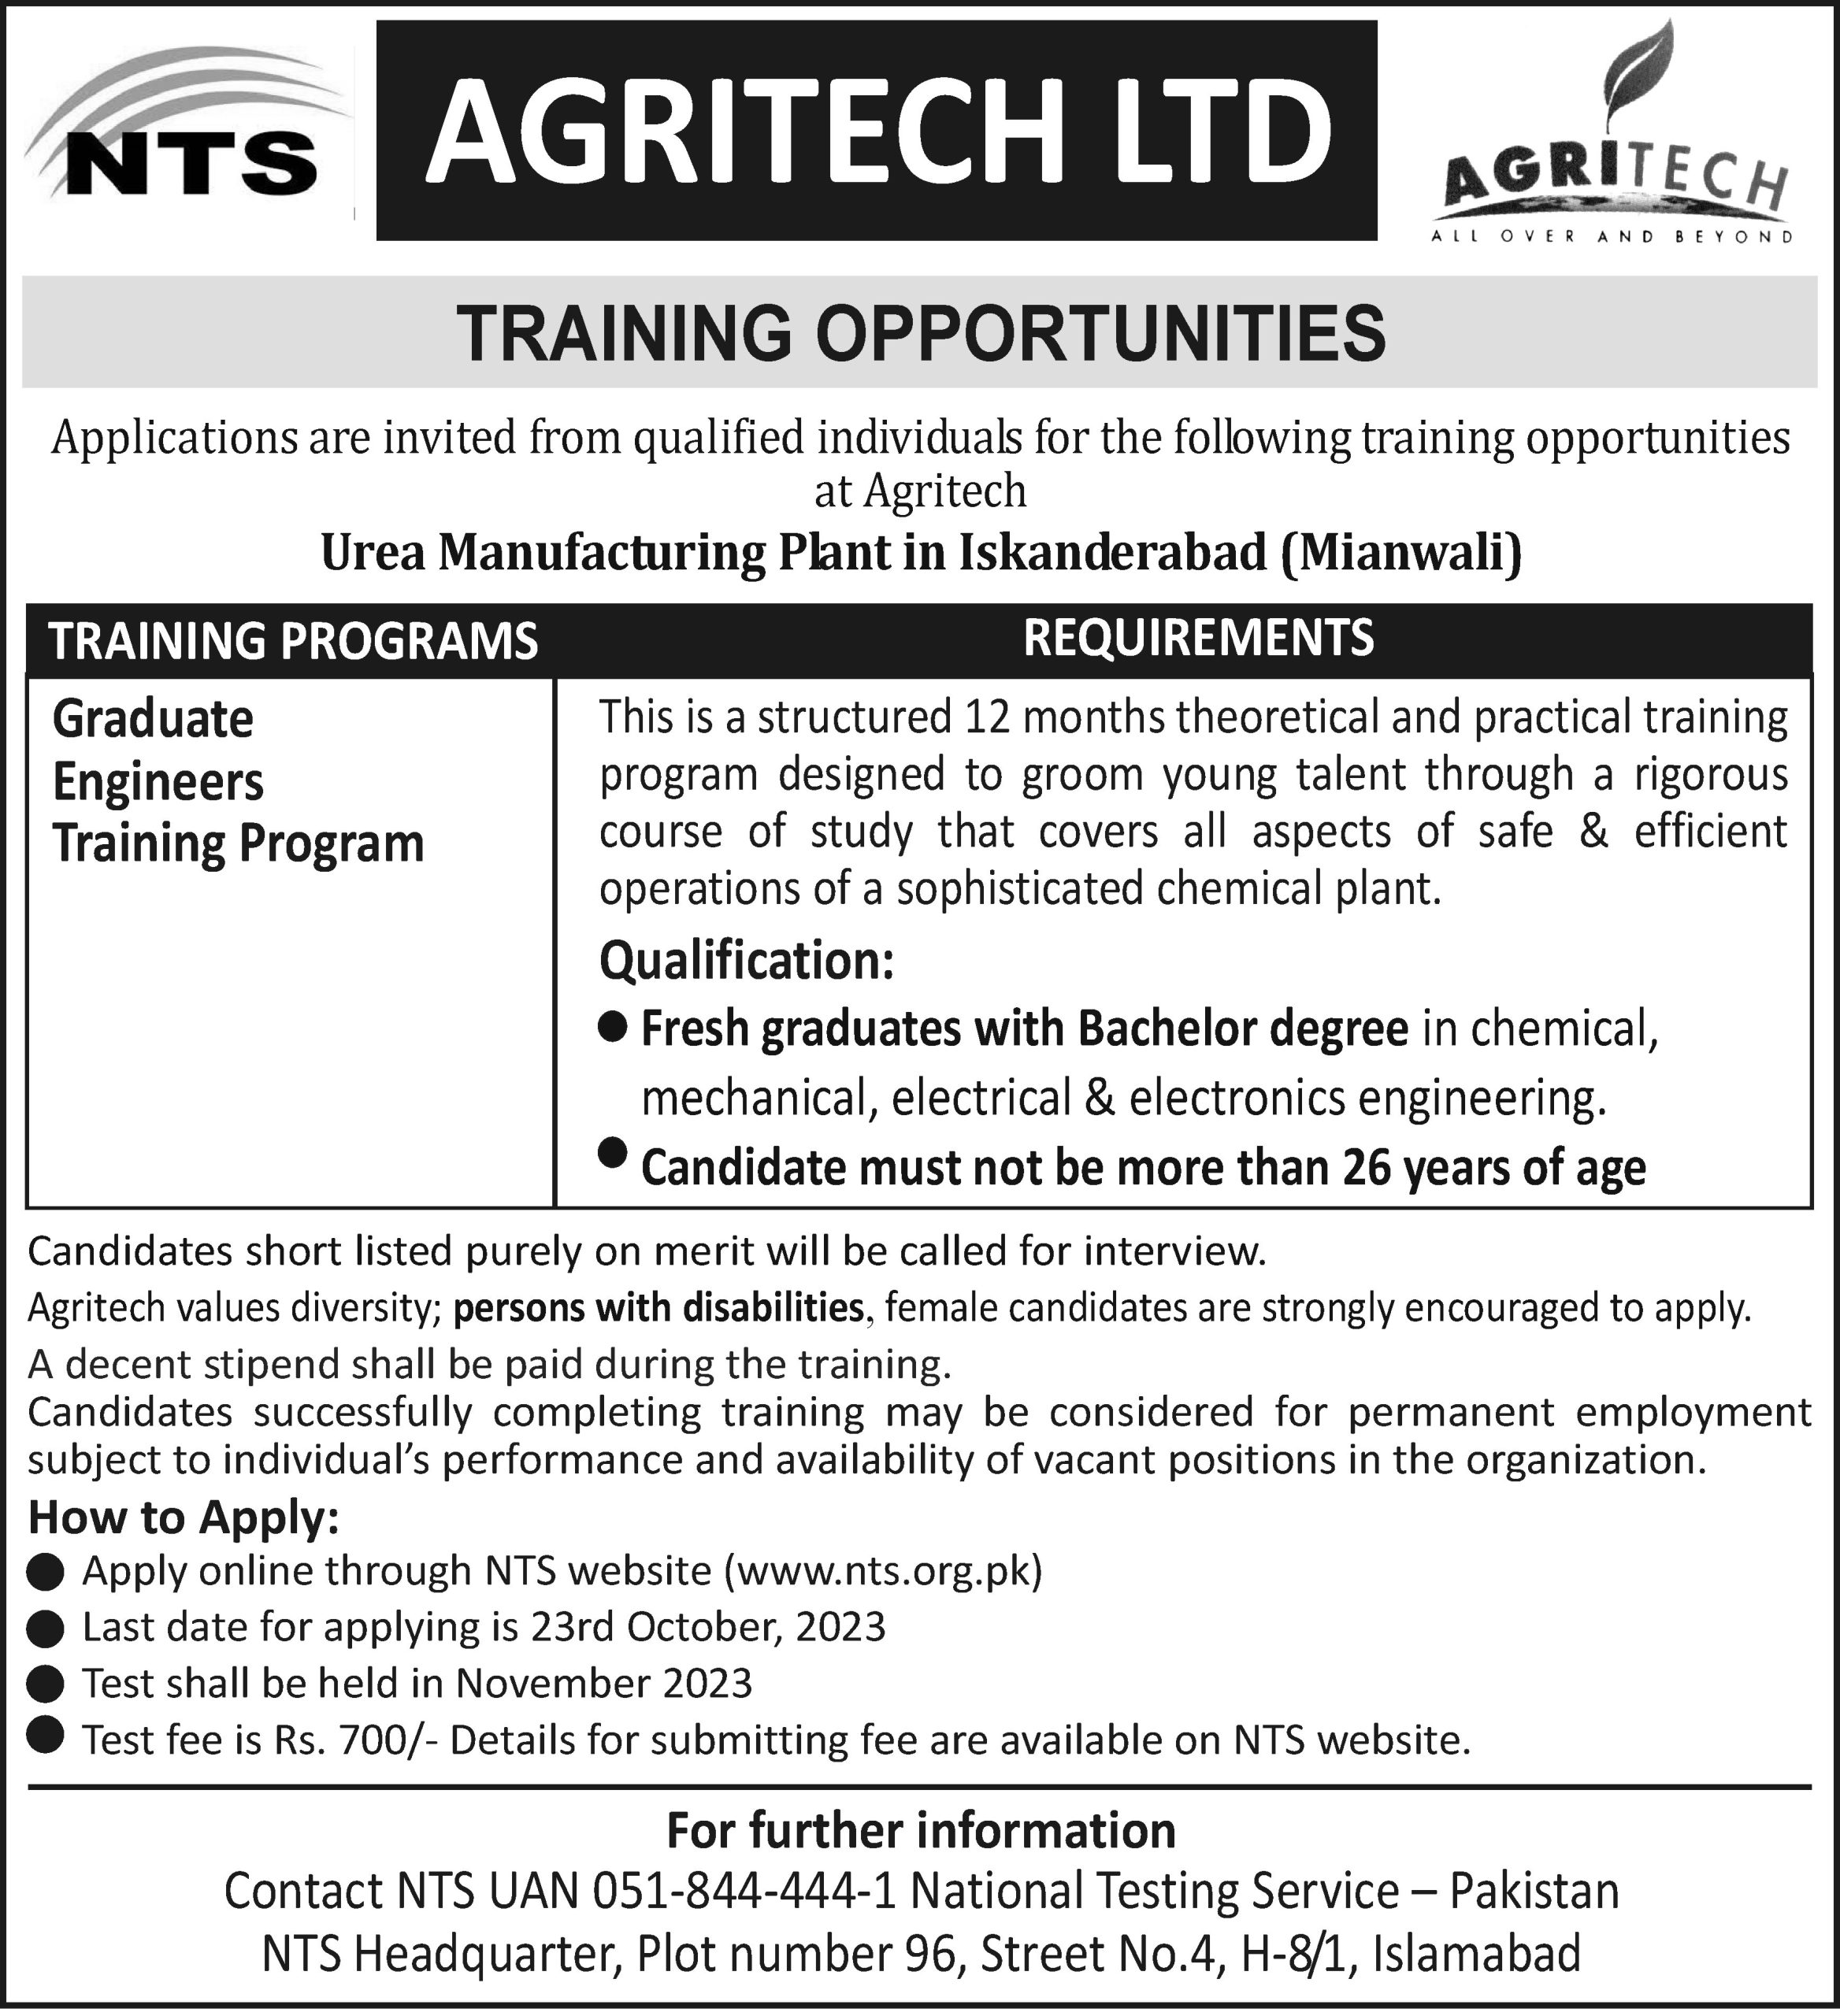 Exciting Training Opportunities at Agritech Ltd